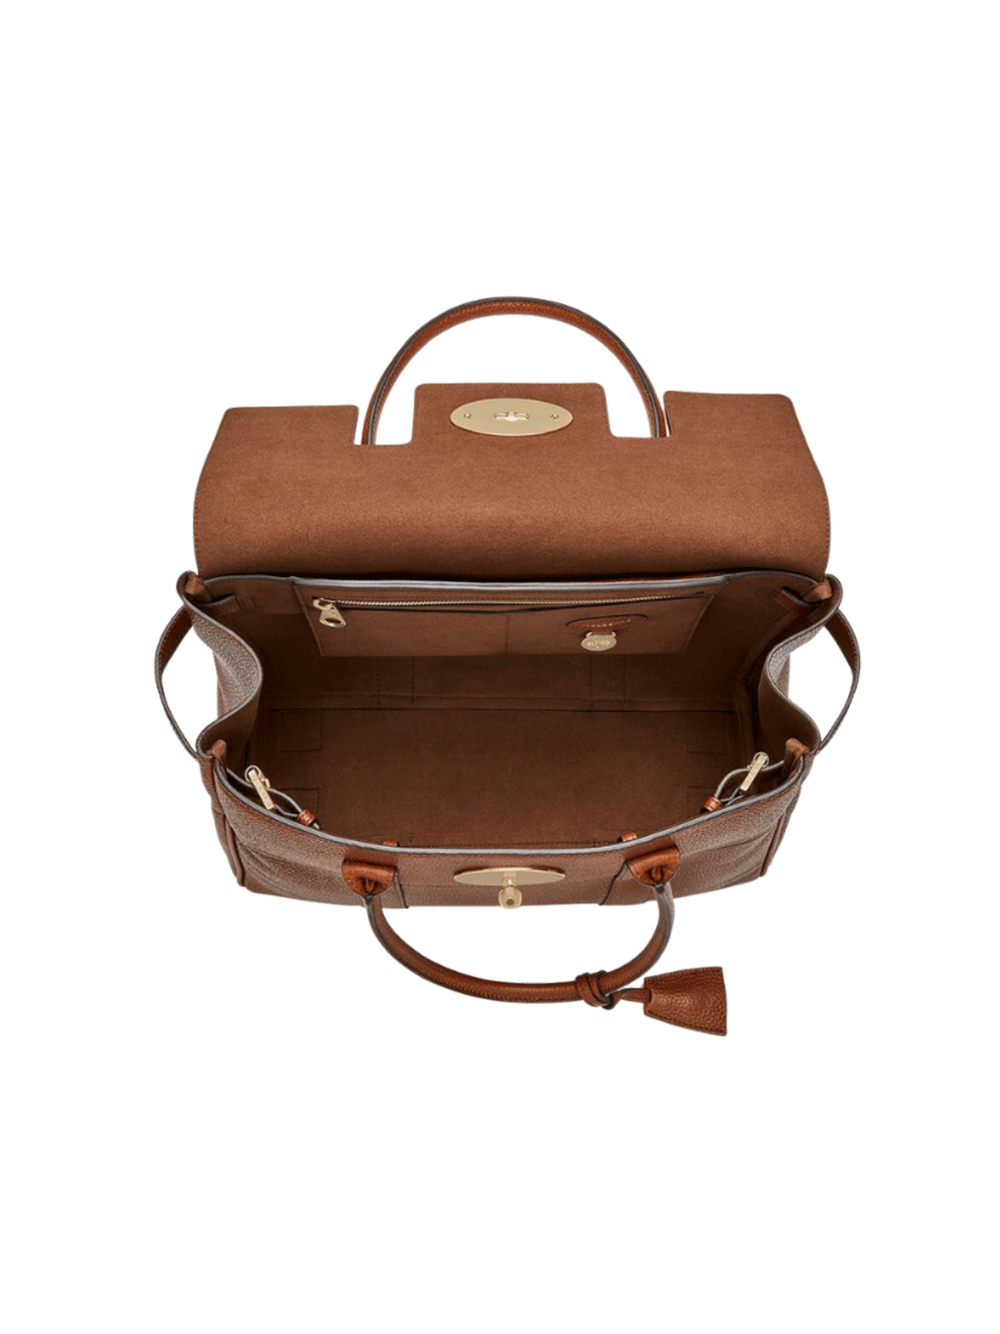 Mulberry-Bayswater-Two-Tone-Small-Classic-Grain-Brown-04